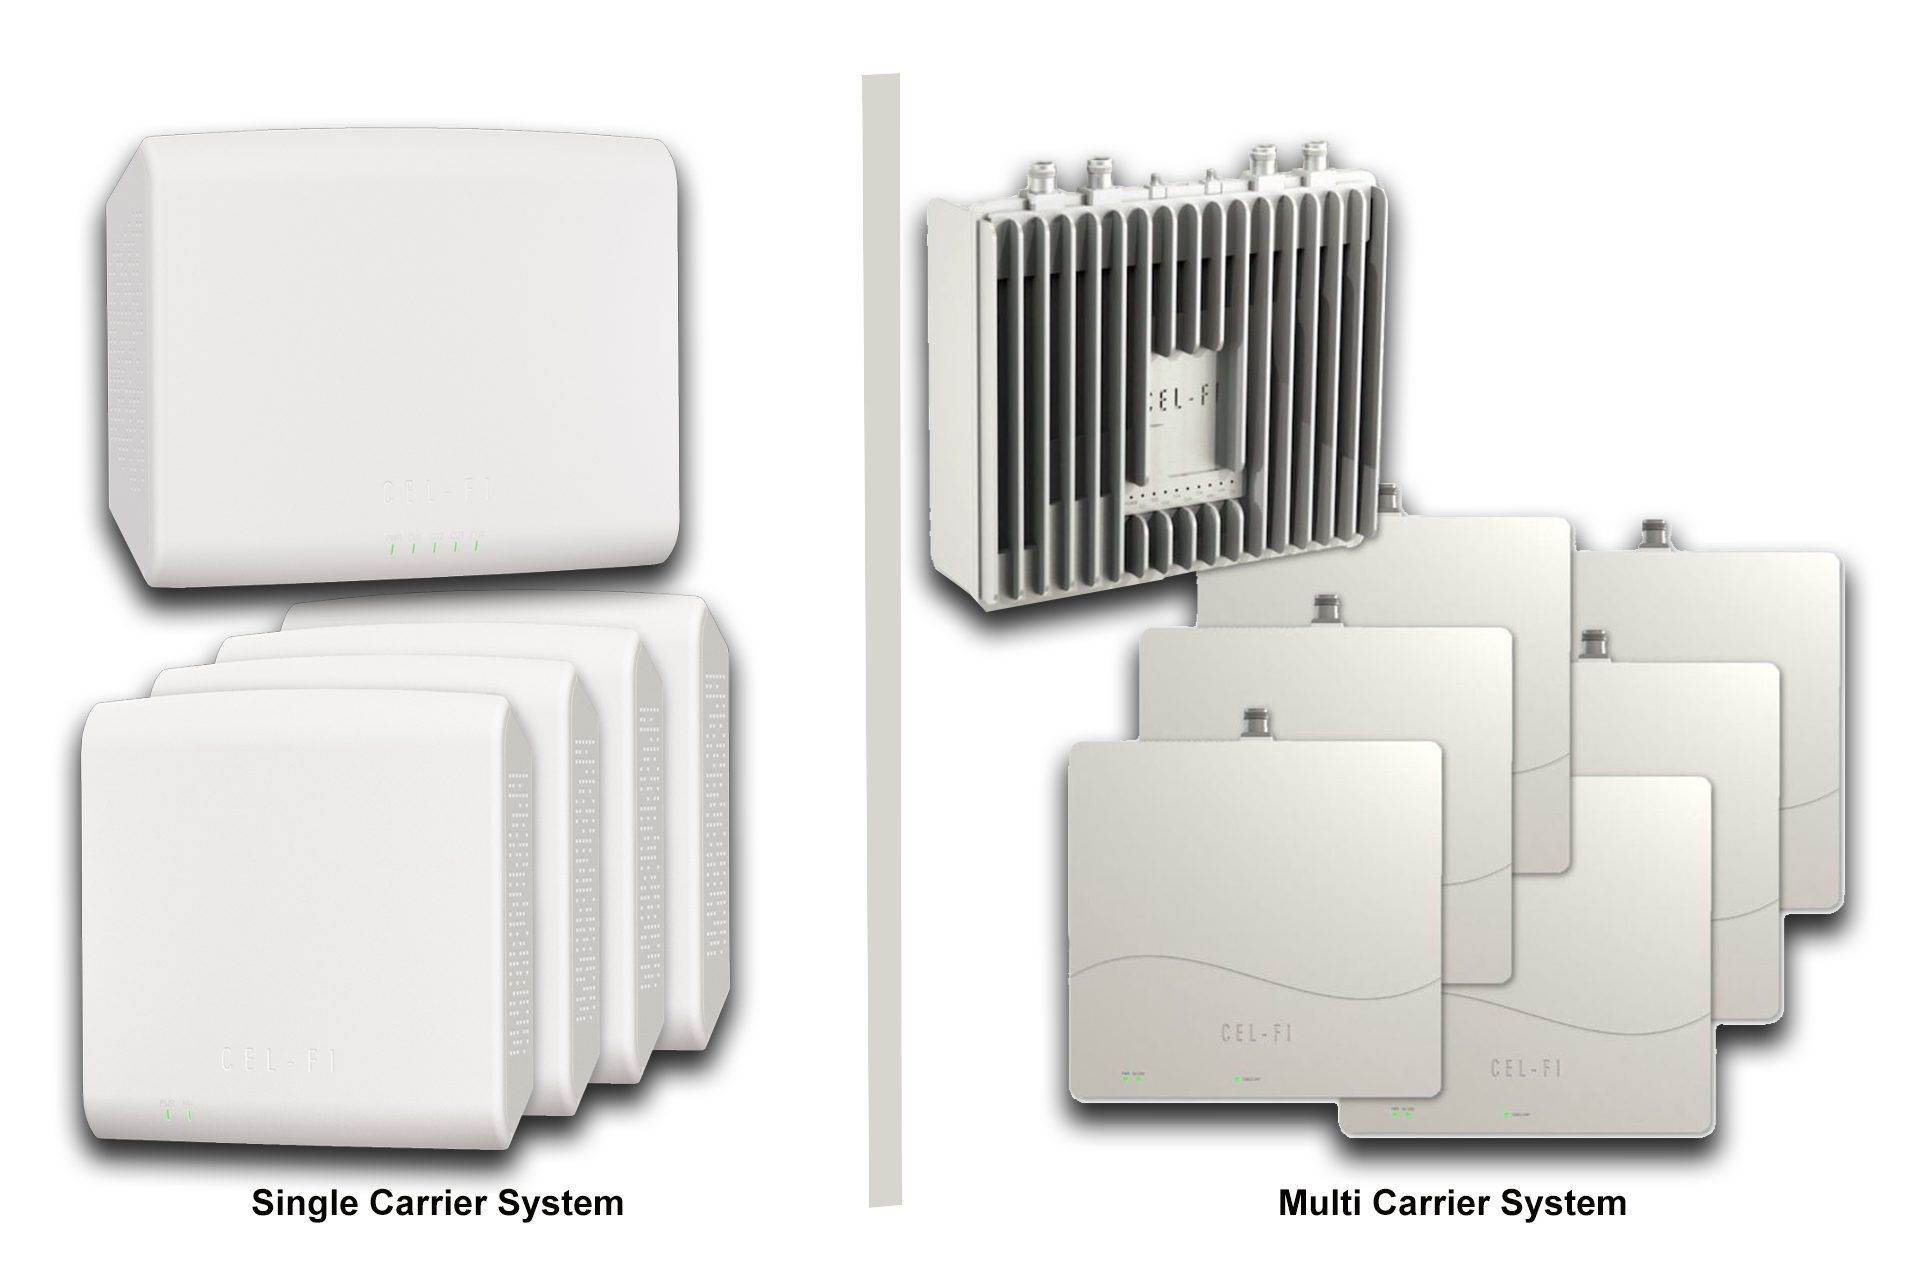 Above are two Nextivity Cel-Fi systems with four antennas working much like a residential WiFi router/switch with multiple access points, offering you cellular coverage.  Either system can offer signal from a single or multiple carriers.